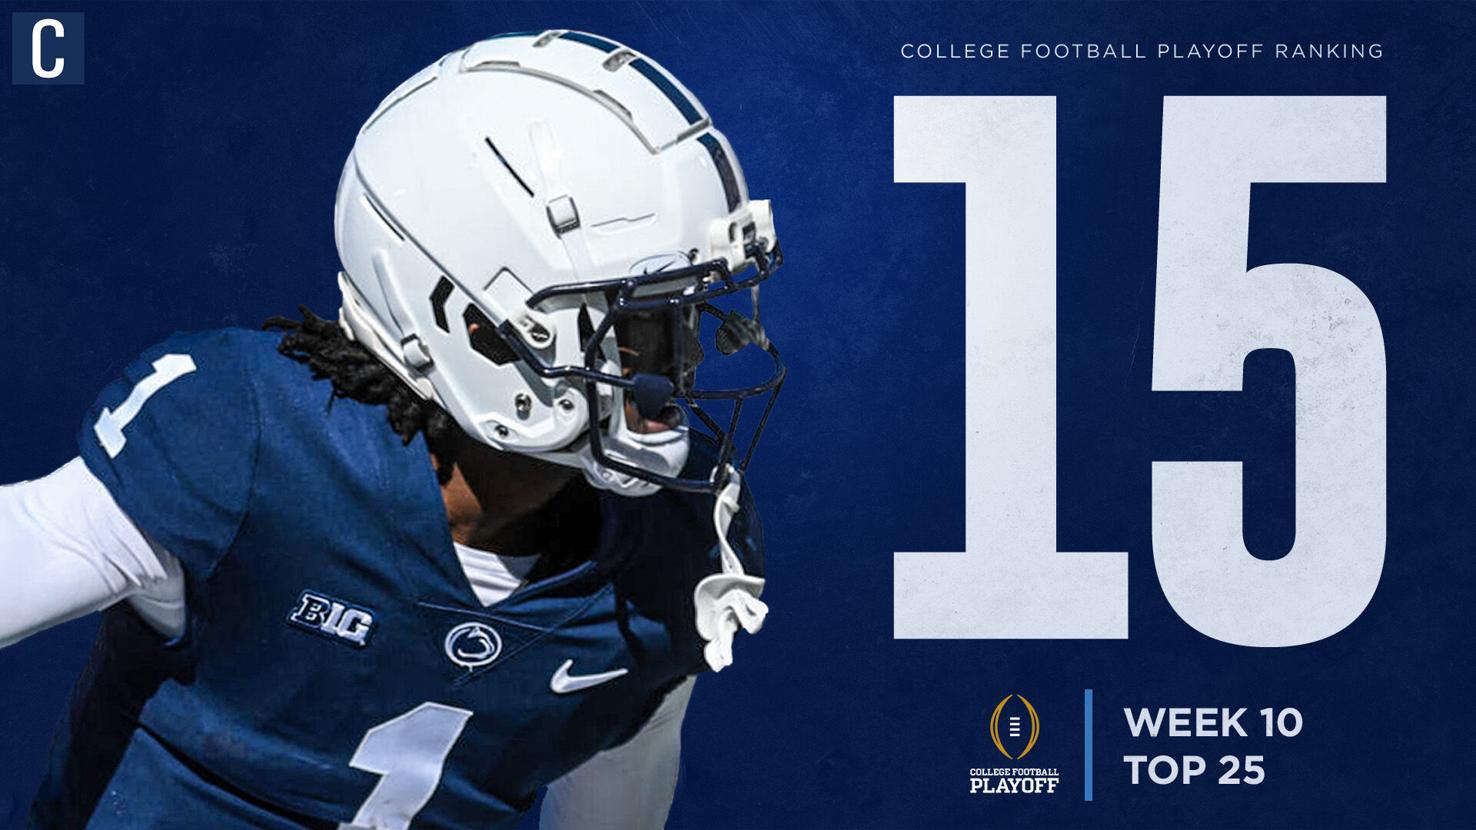 Penn State football placed No. 15 in 1st College Football Playoff